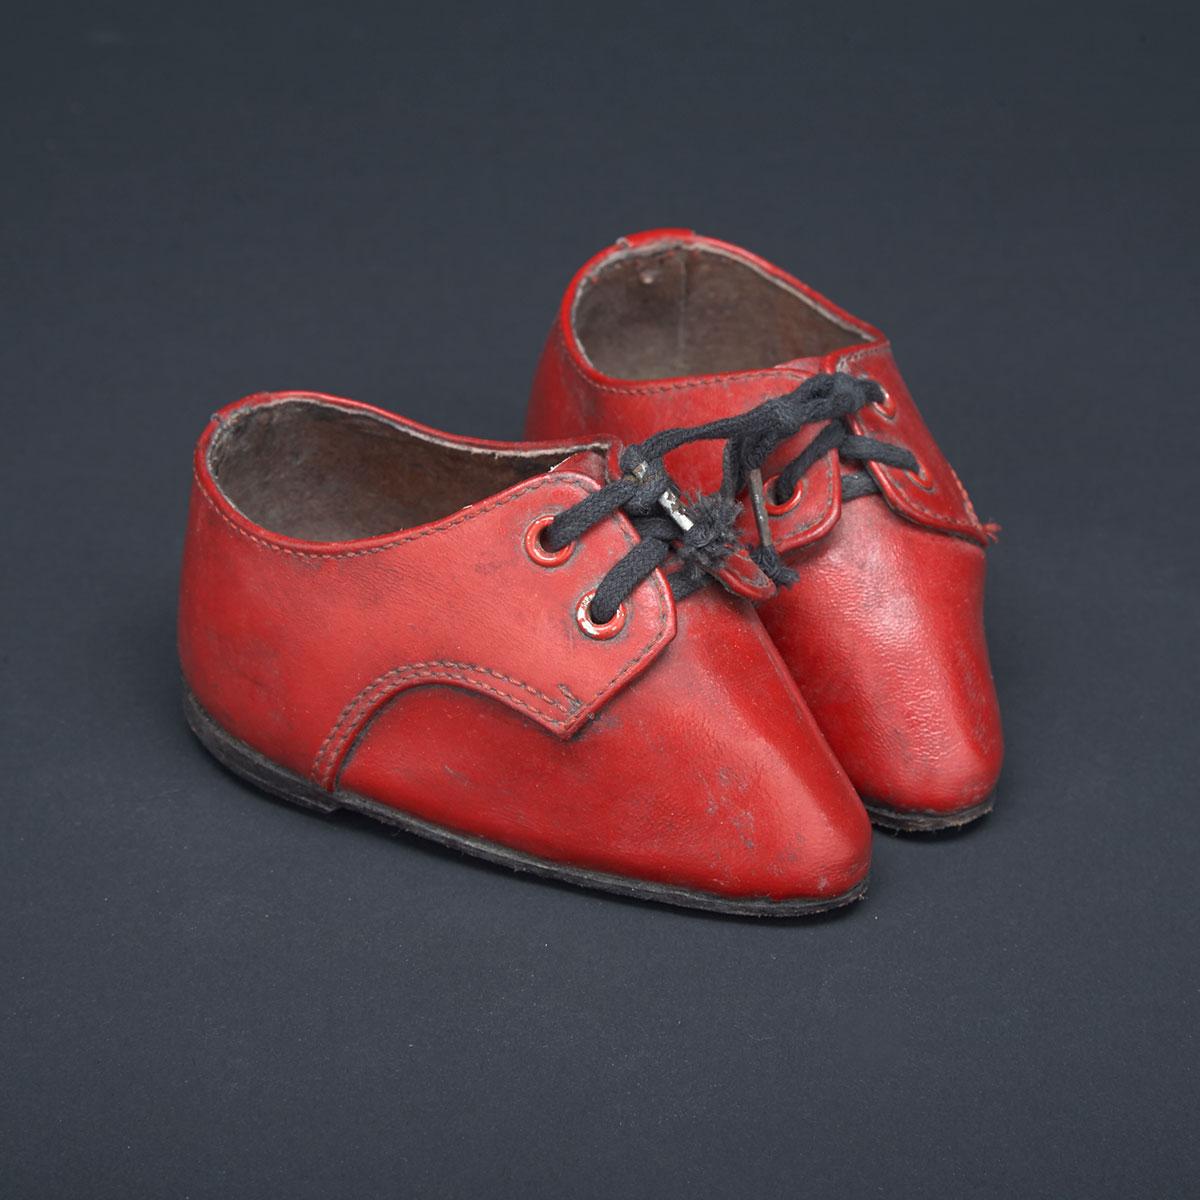 Pair of Chinese Red Leather Shoes for Bound Feet, early-mid 20th century